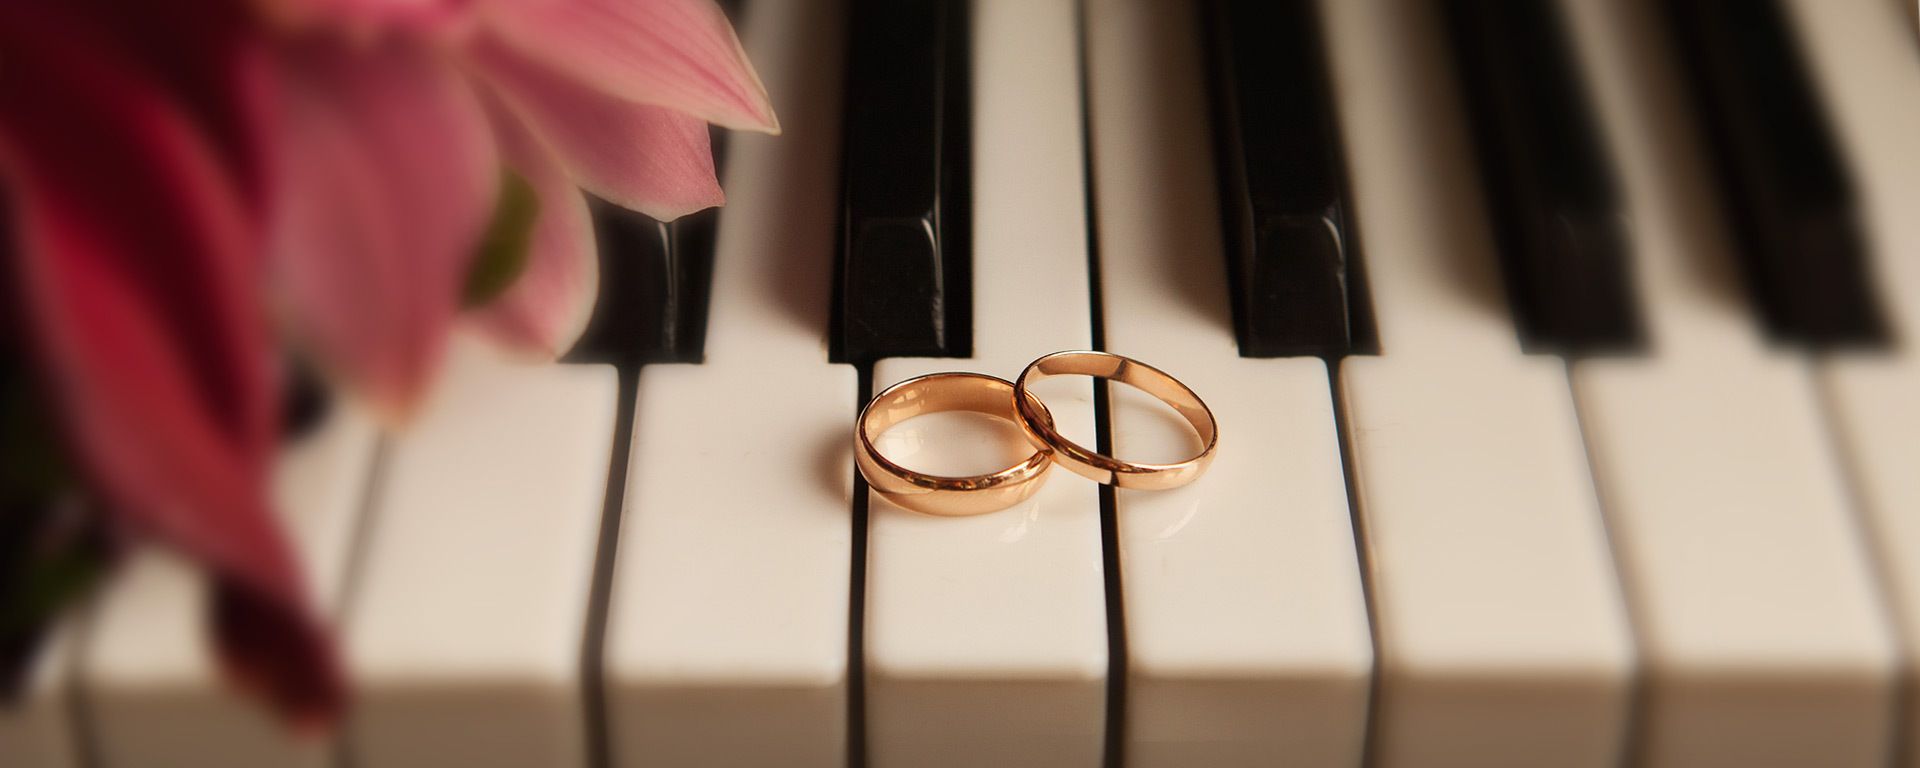 How to find the perfect wedding video songs